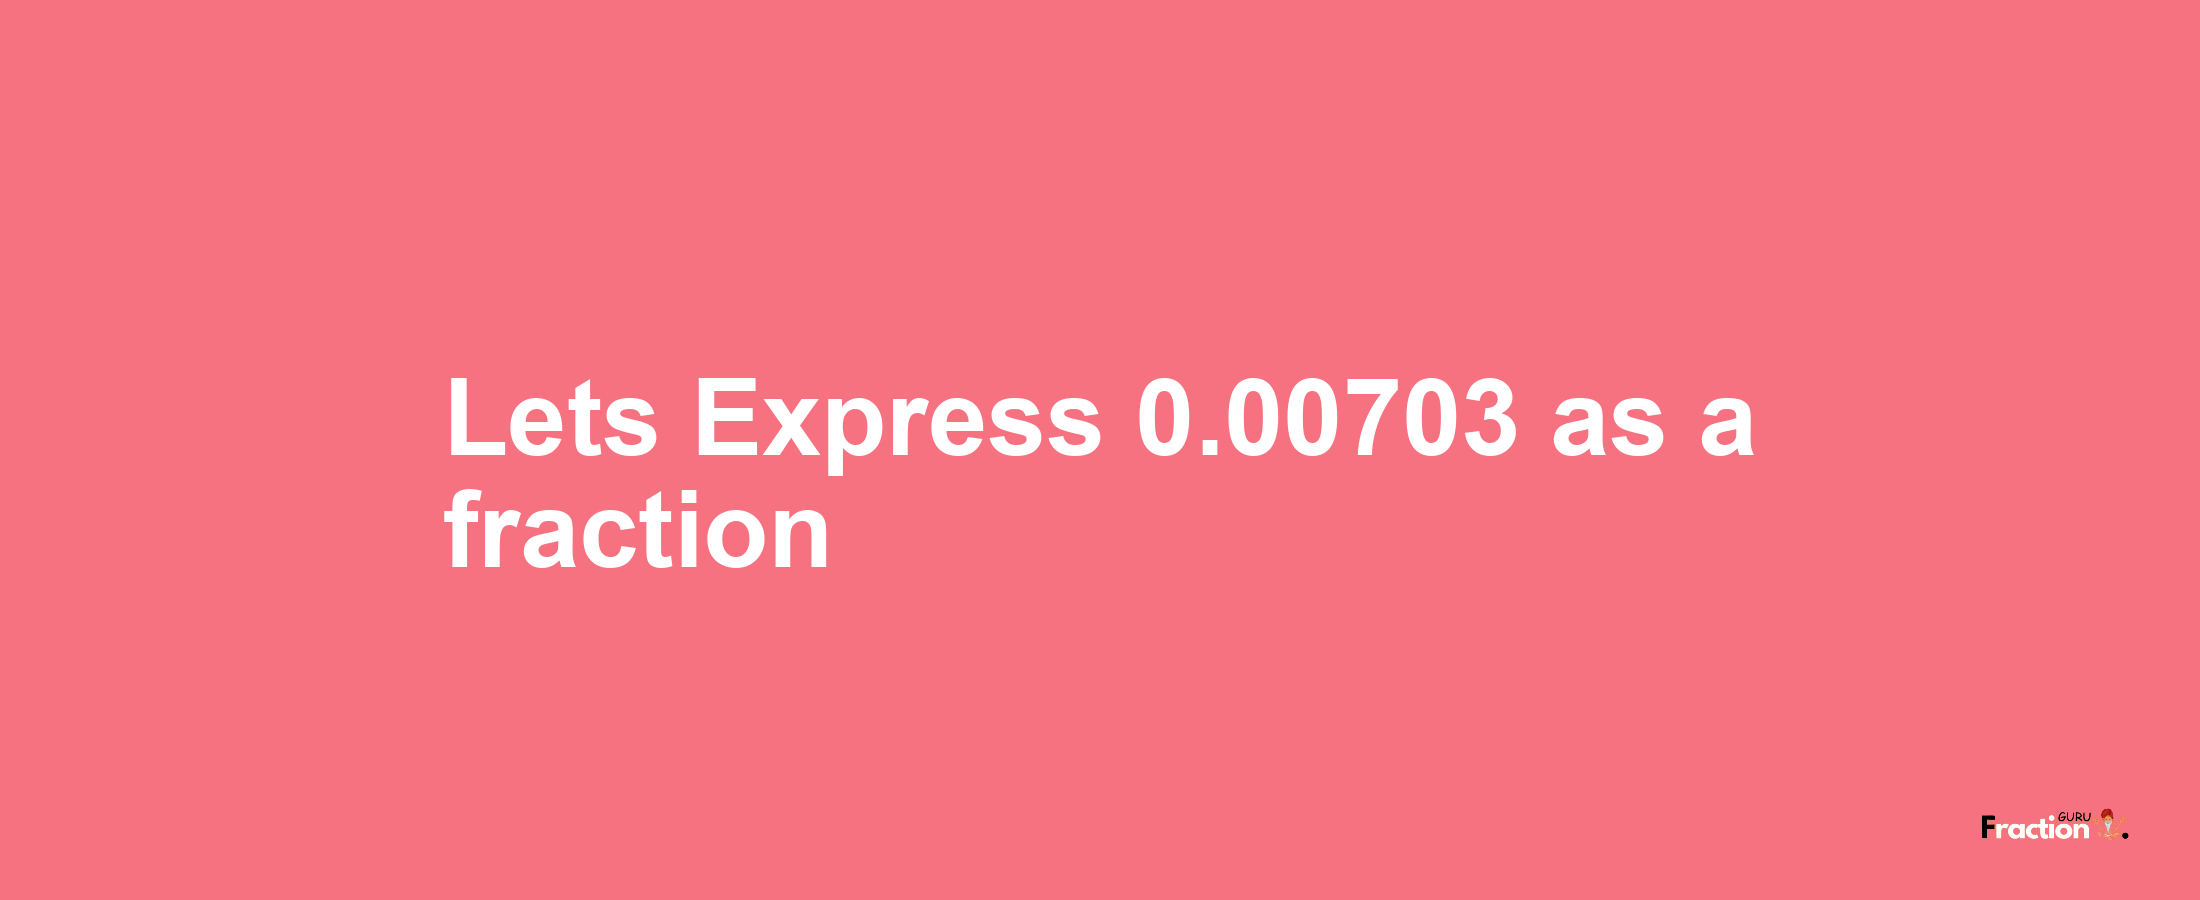 Lets Express 0.00703 as afraction